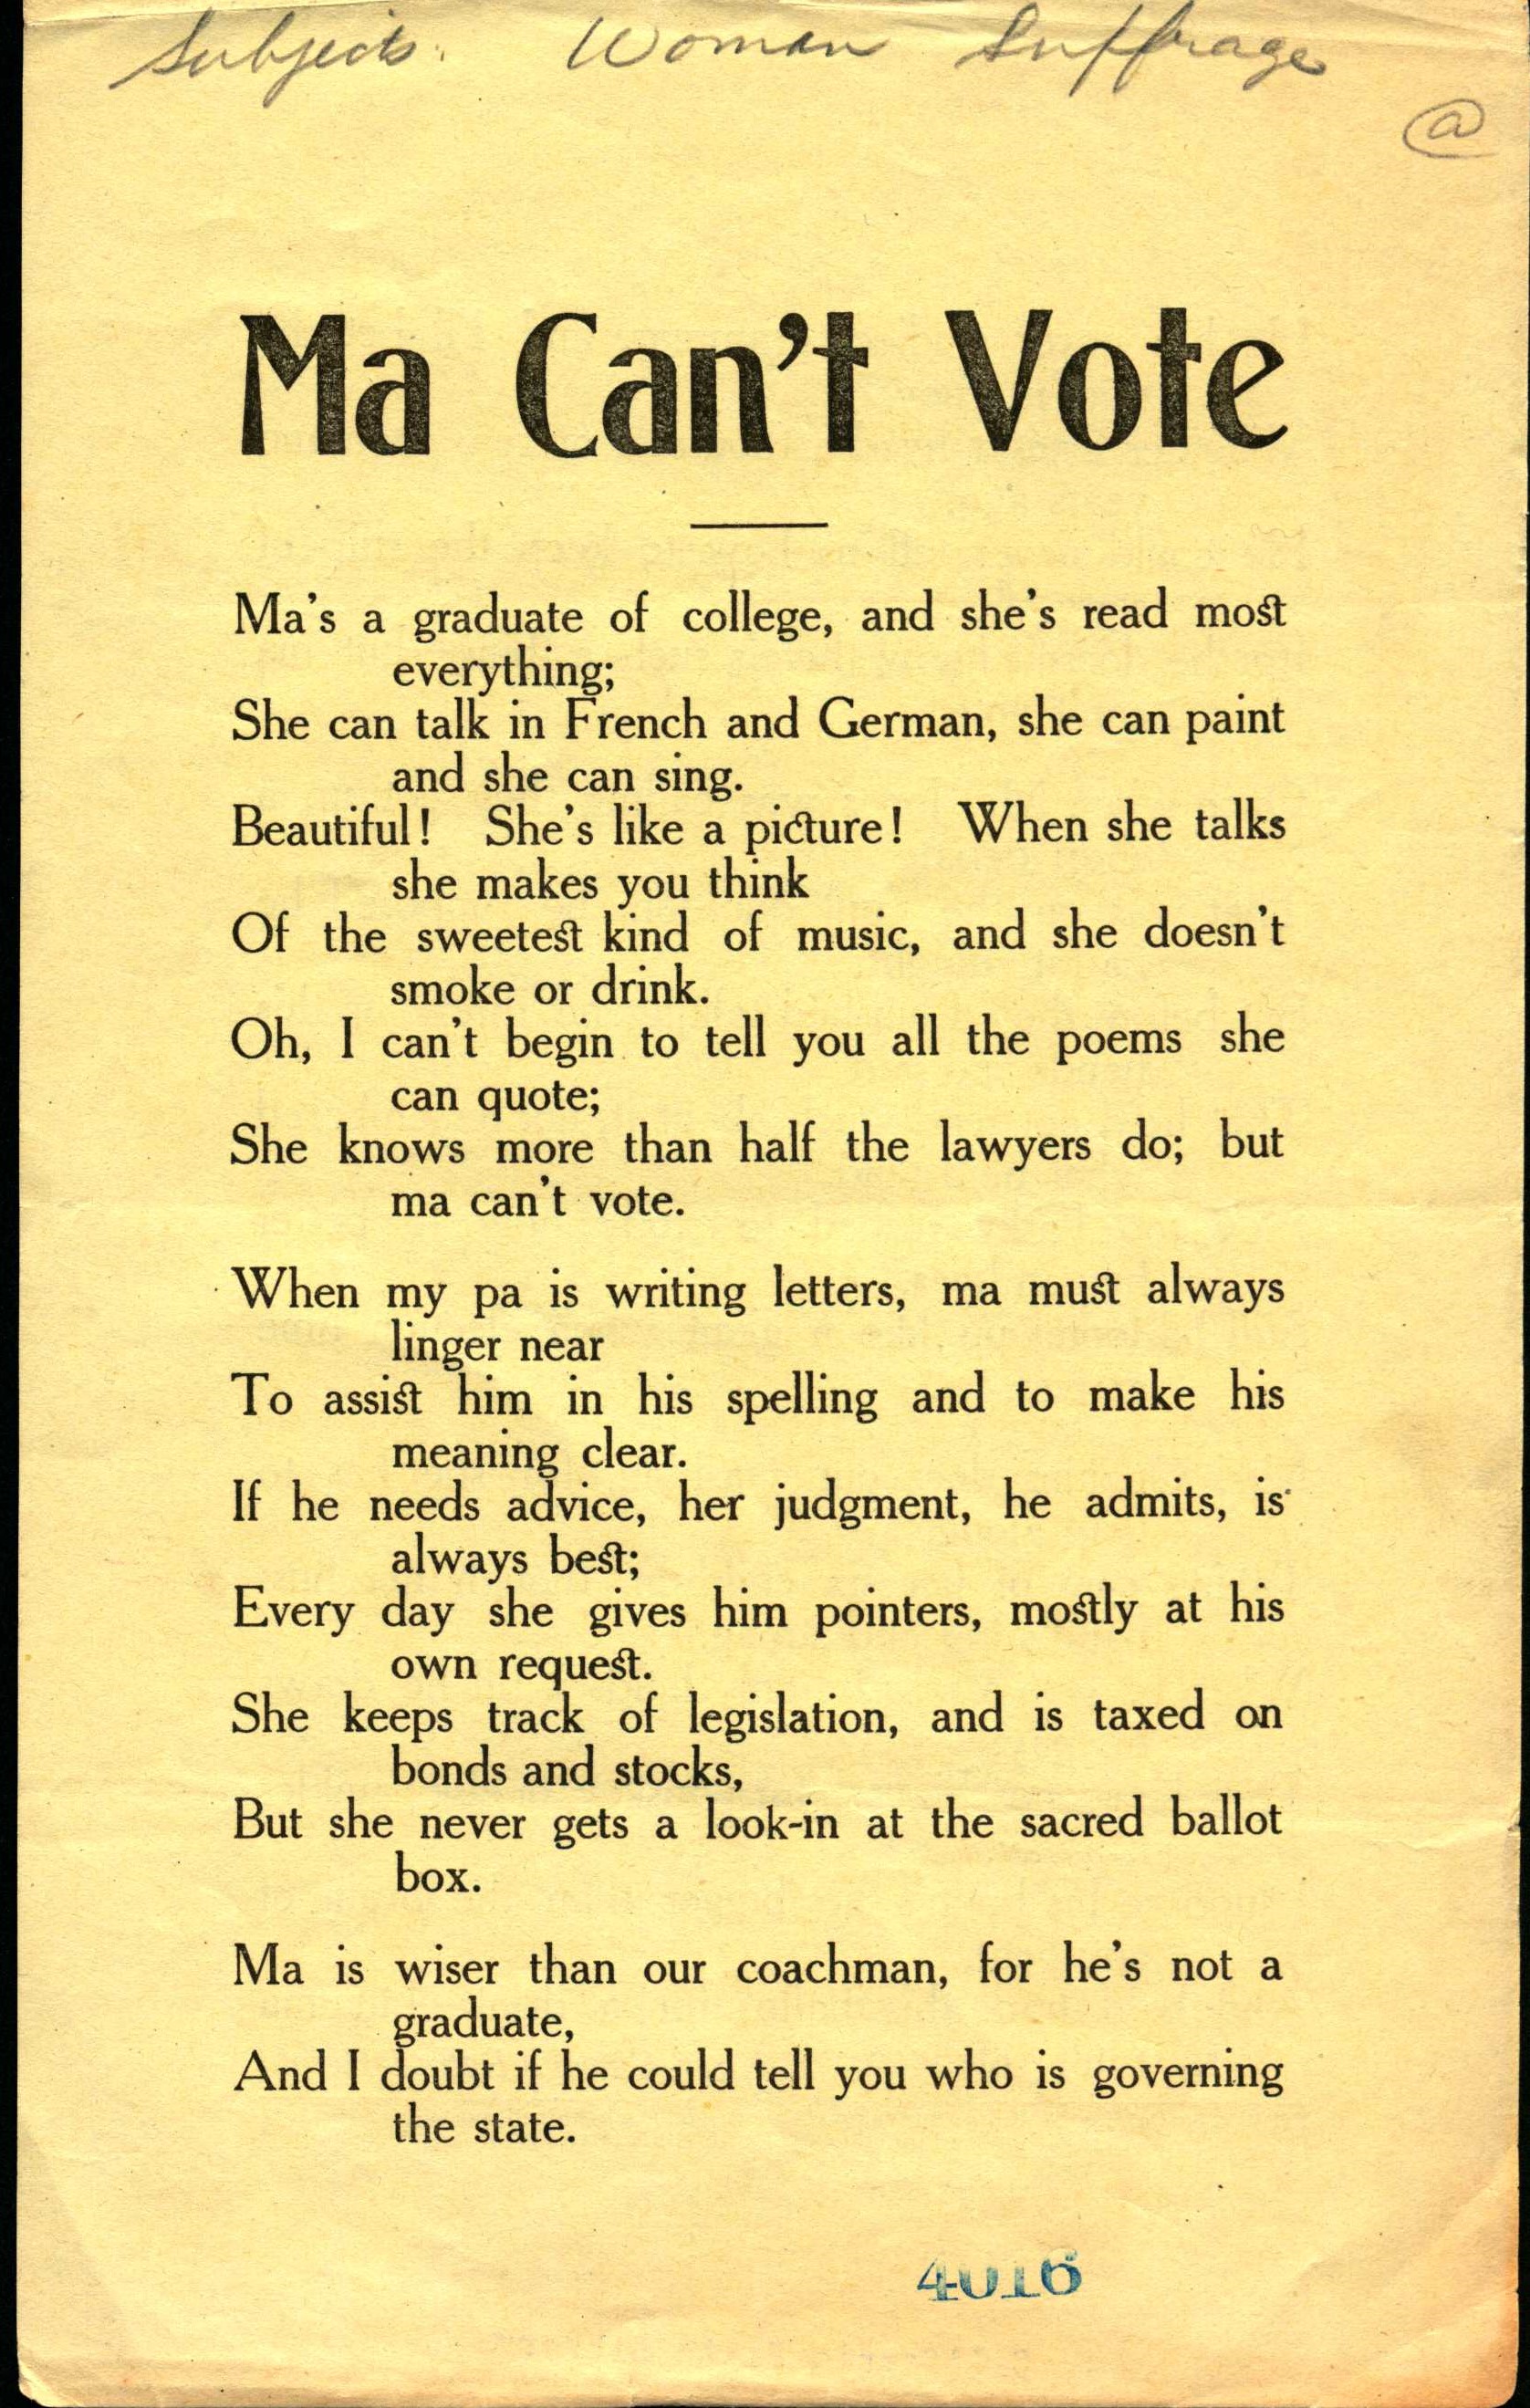 Front shows the title and the first part of a poem